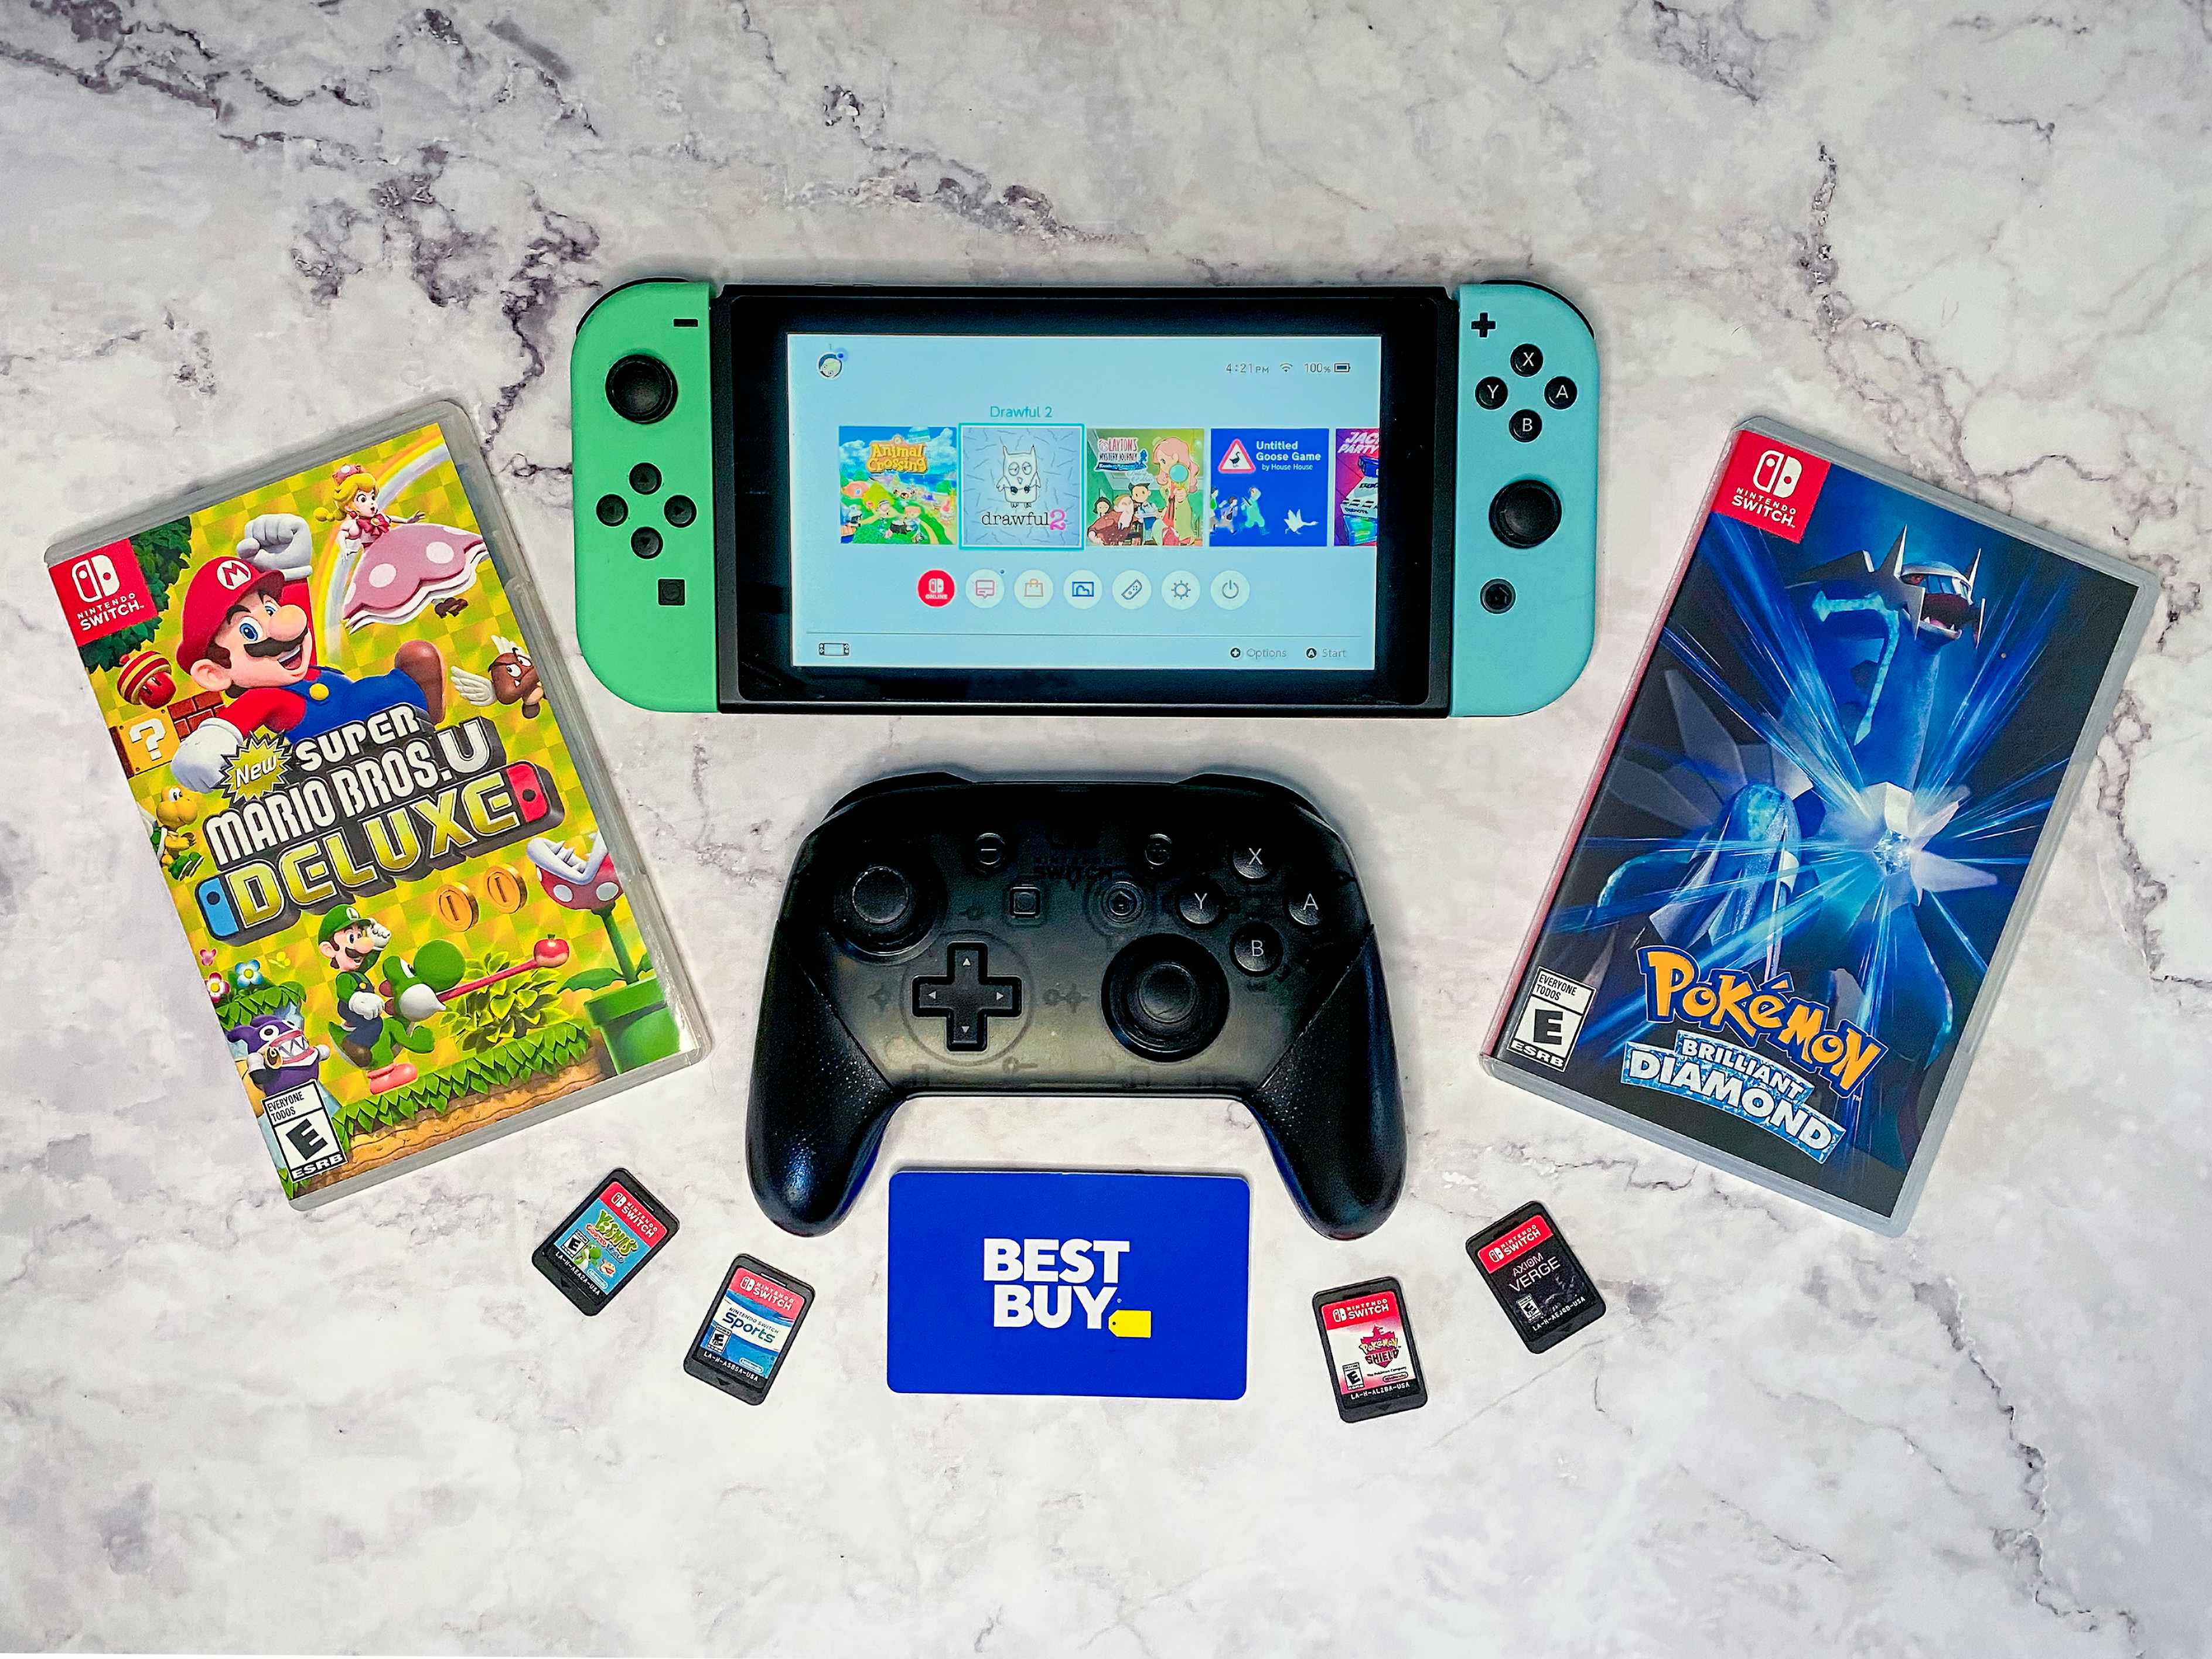 a Nintendo Switch, pro controller, games, and a Best Buy gift card on a table